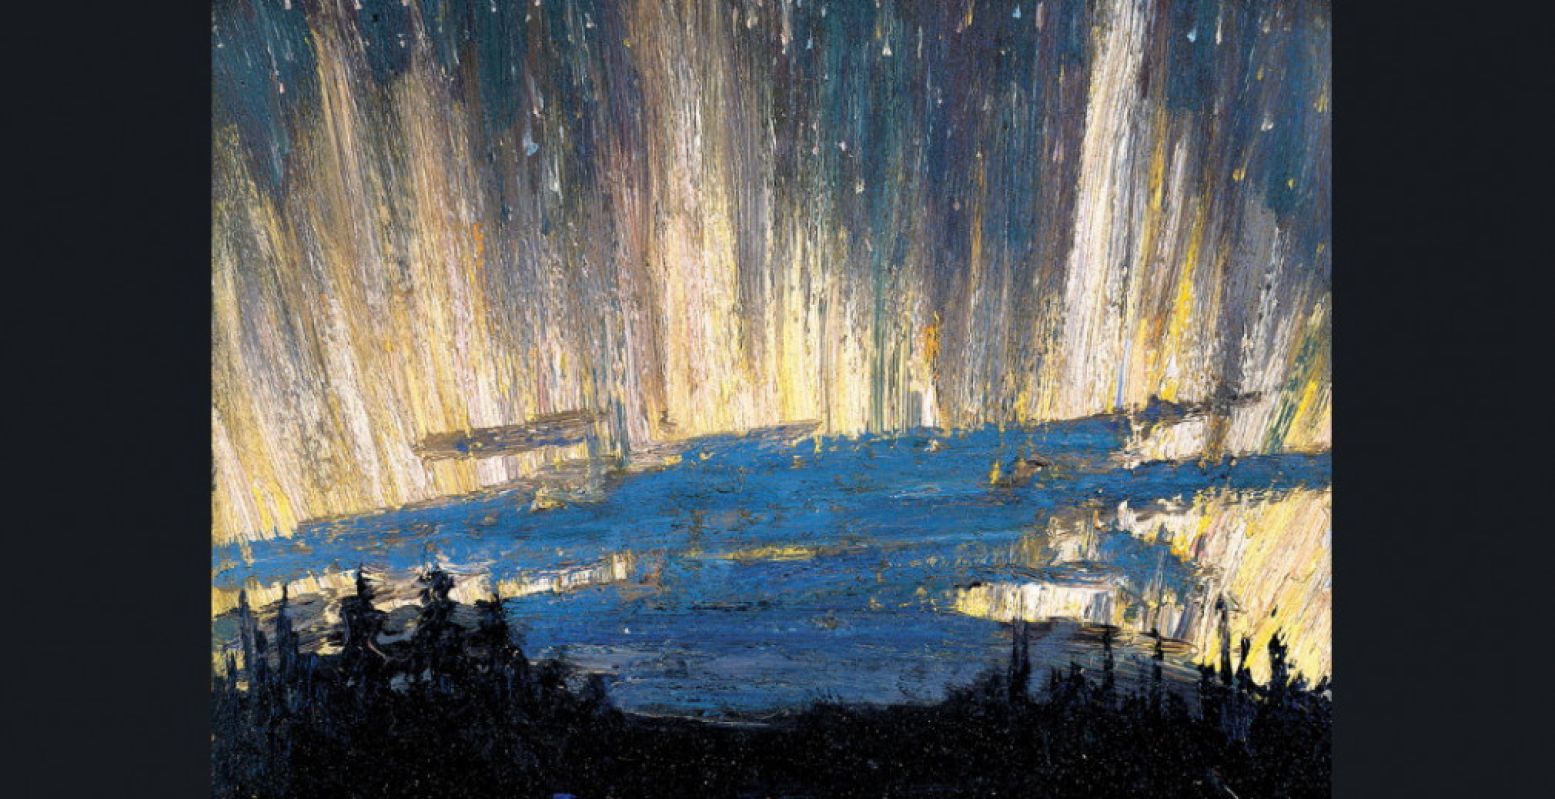 Tom Thomson, Claremont, Northern Lights, circa 1916-1917. Olieverf op hout. The Montreal Museum of Fine Arts. Aangekocht door A. Sidney Dawes Fund. Foto: MMFA, Jean-FranÃ§ois Brière